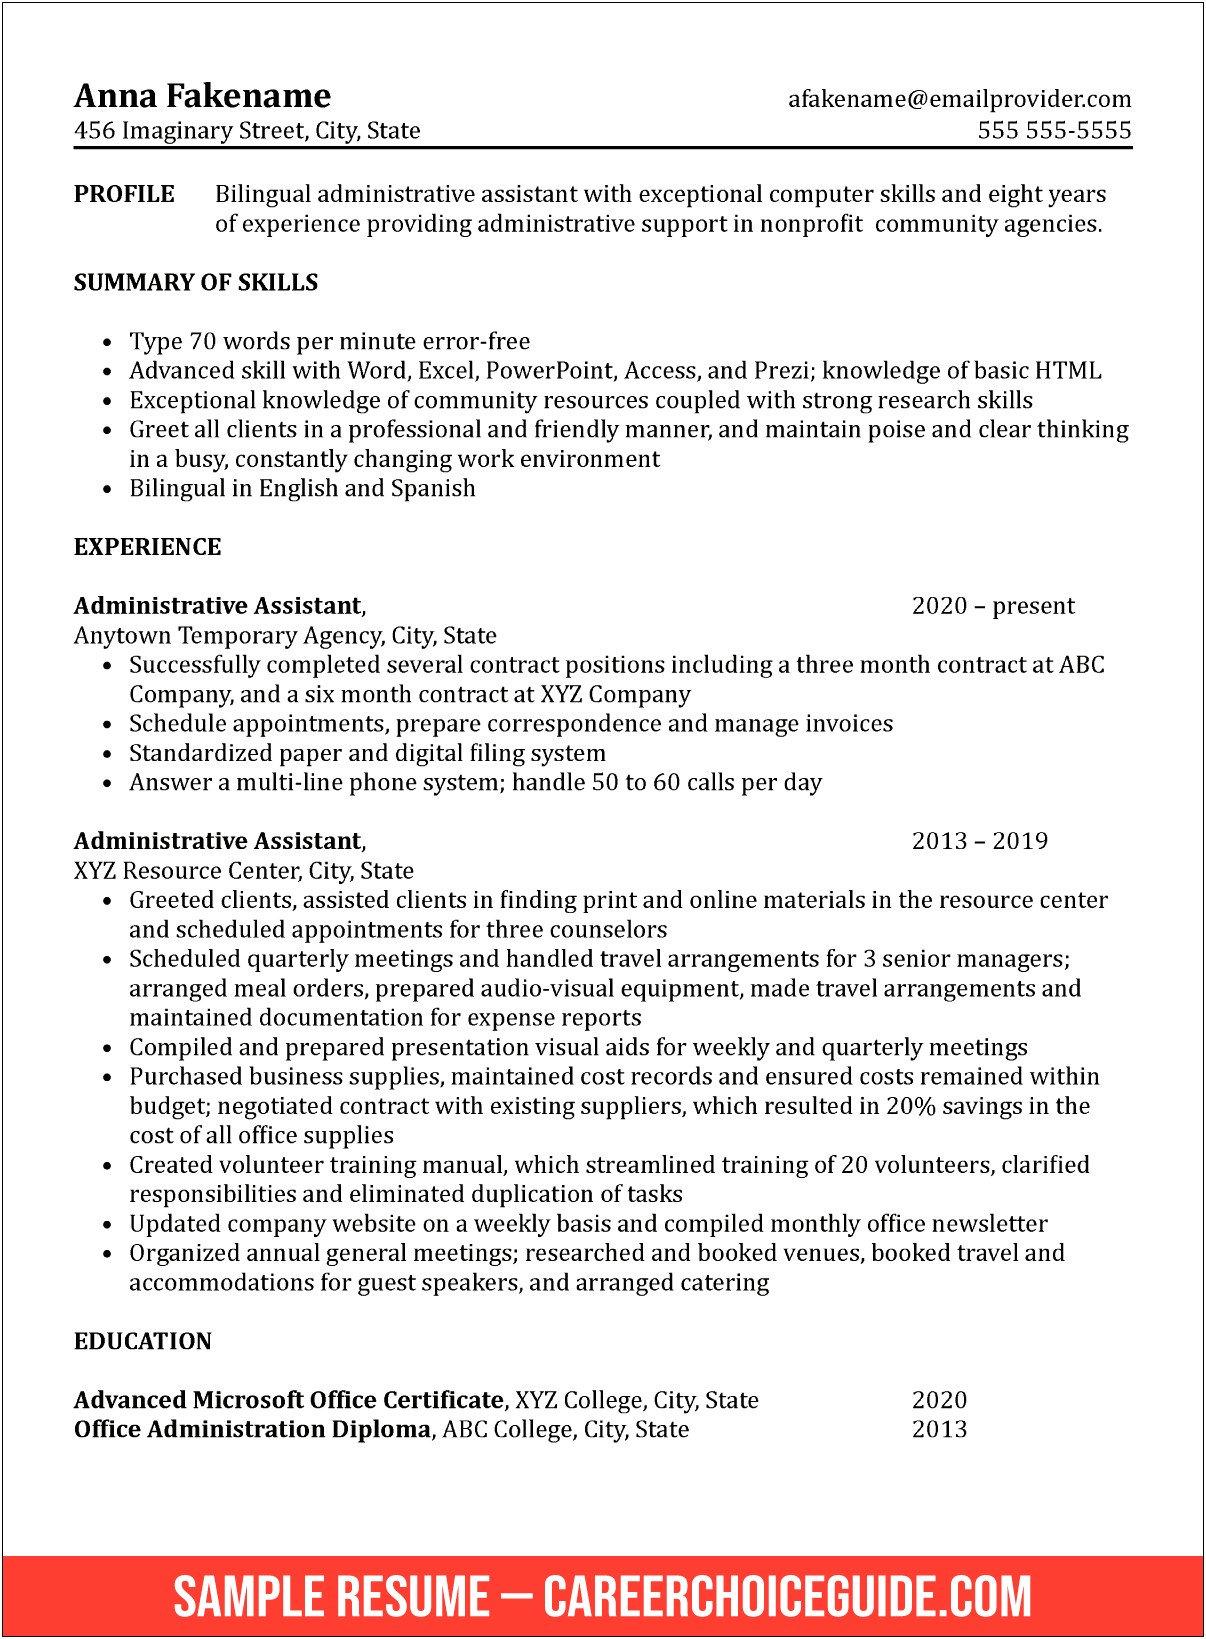 Resume Examples For An Office Assistant